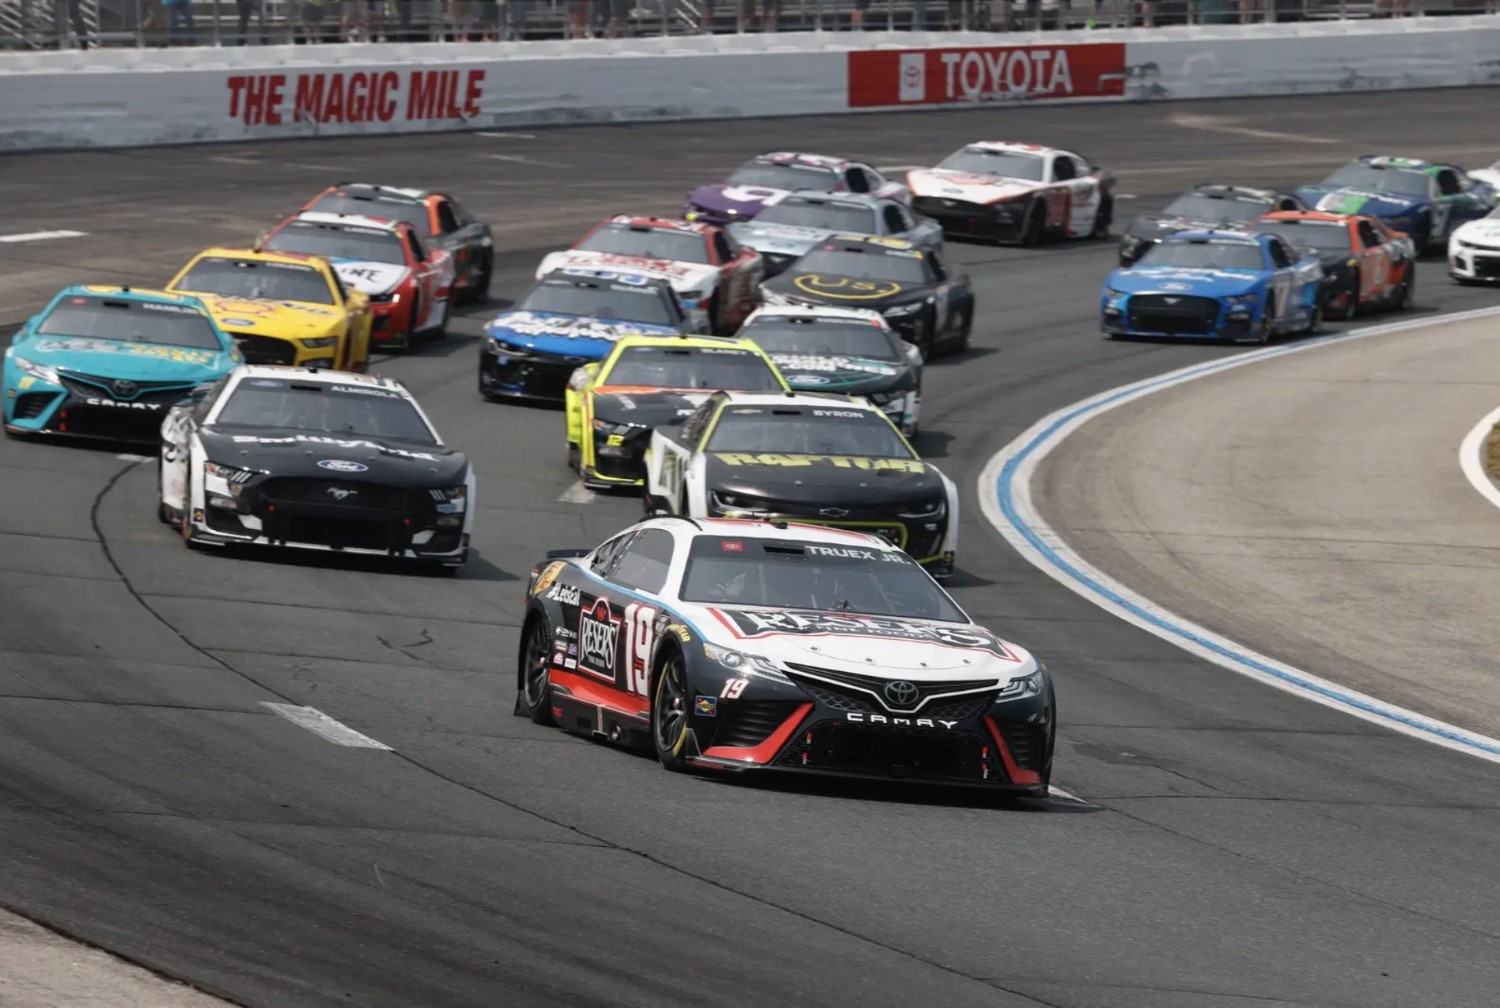 Martin Truex Jr. dominated the Crayon 301 NASCAR Cup race in Loudon Monday